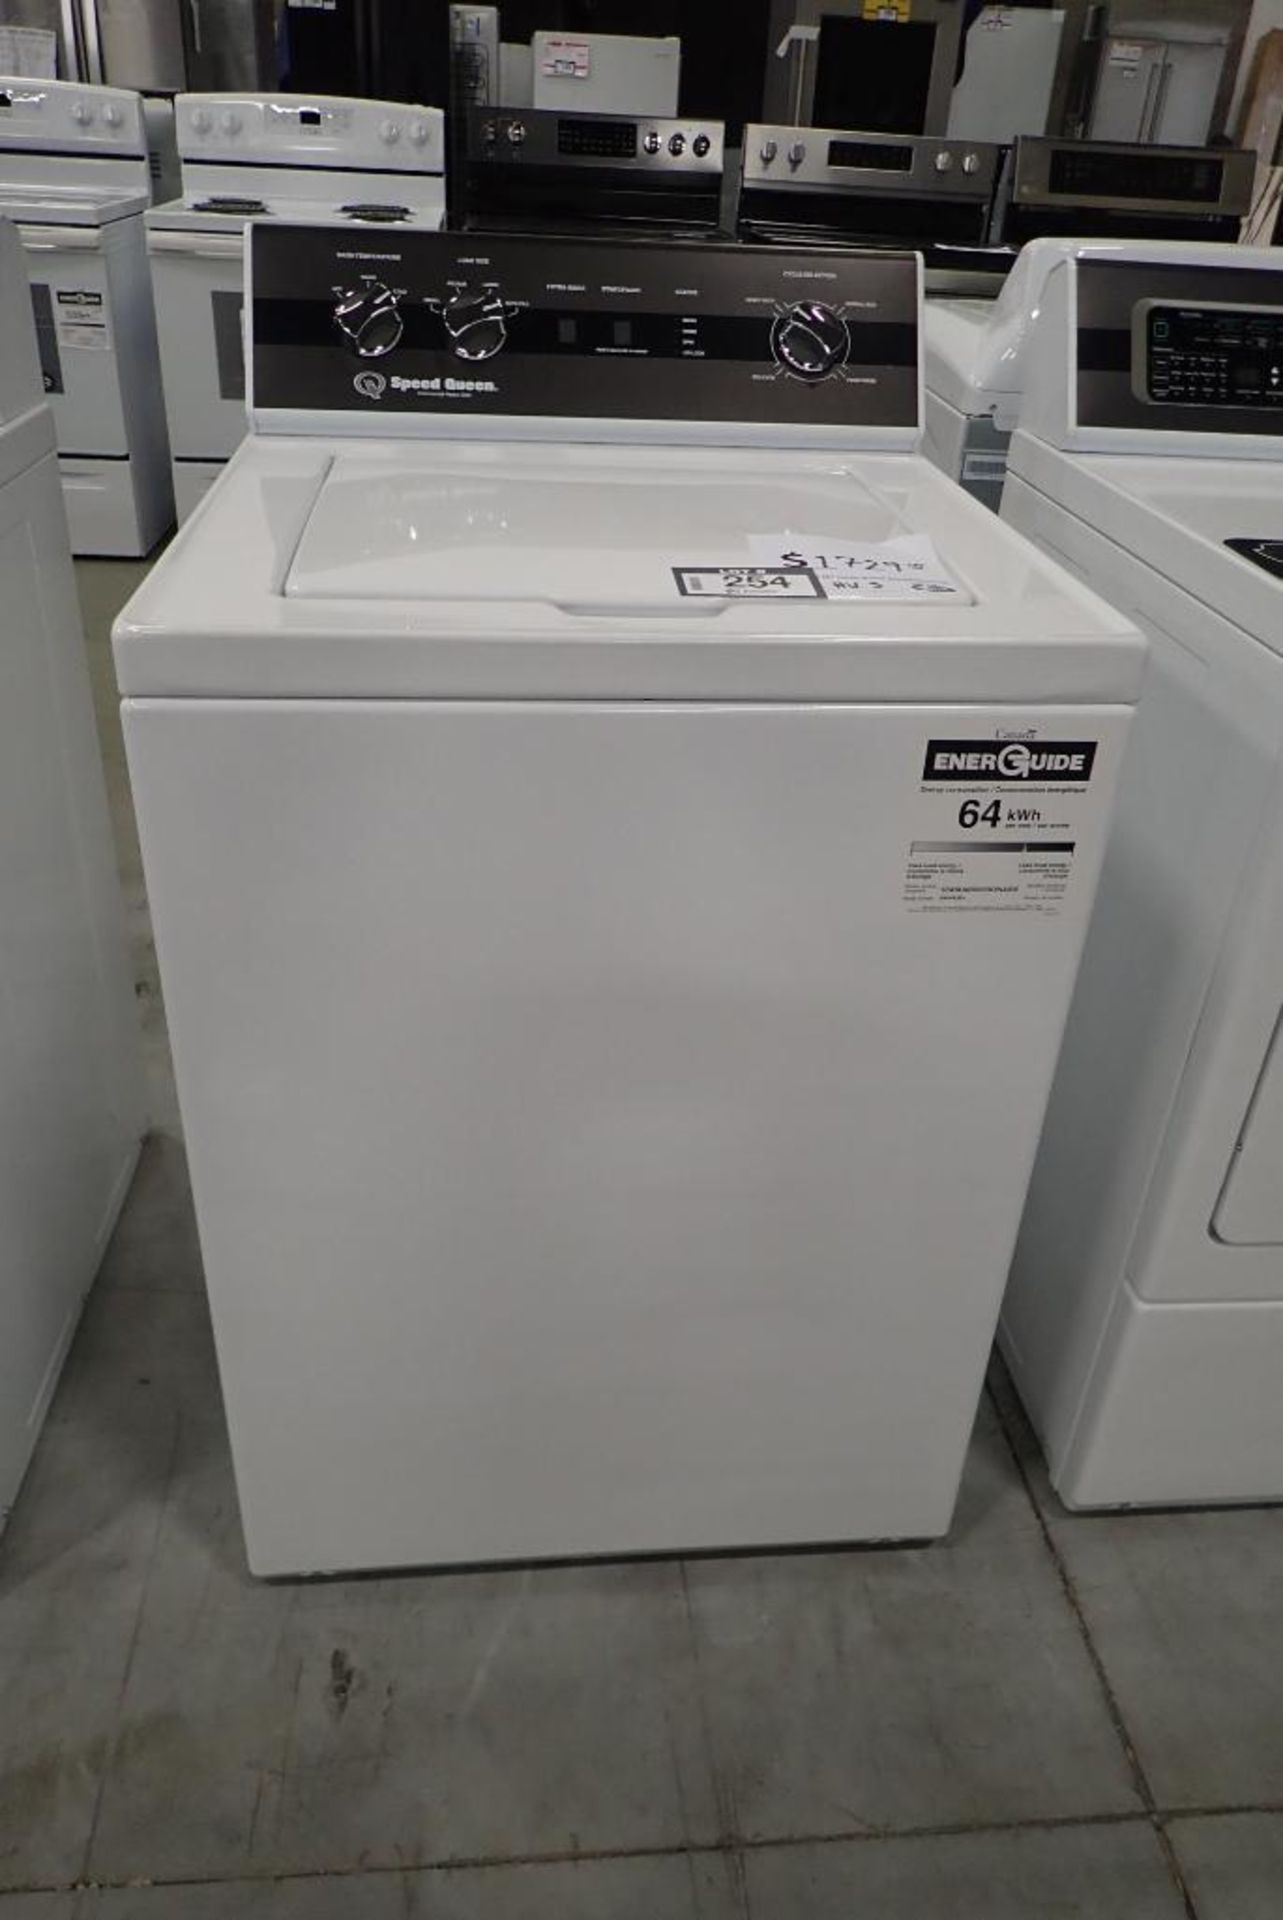 Speed Queen Commercial Heavy Duty AWN43RSN115CW01 Top Load Washer.